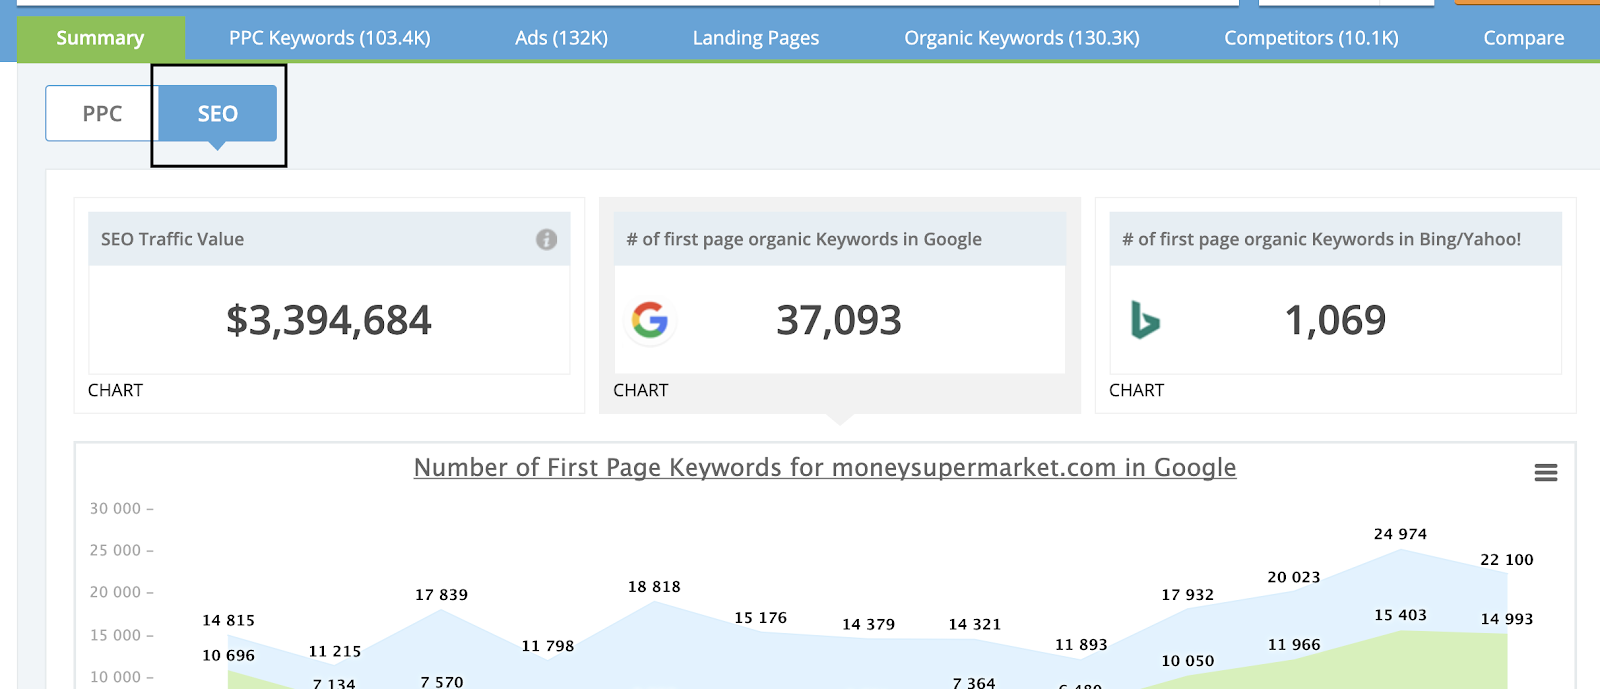 SEO Traffic Value, # of first page organic keywords in Google/ Bing 